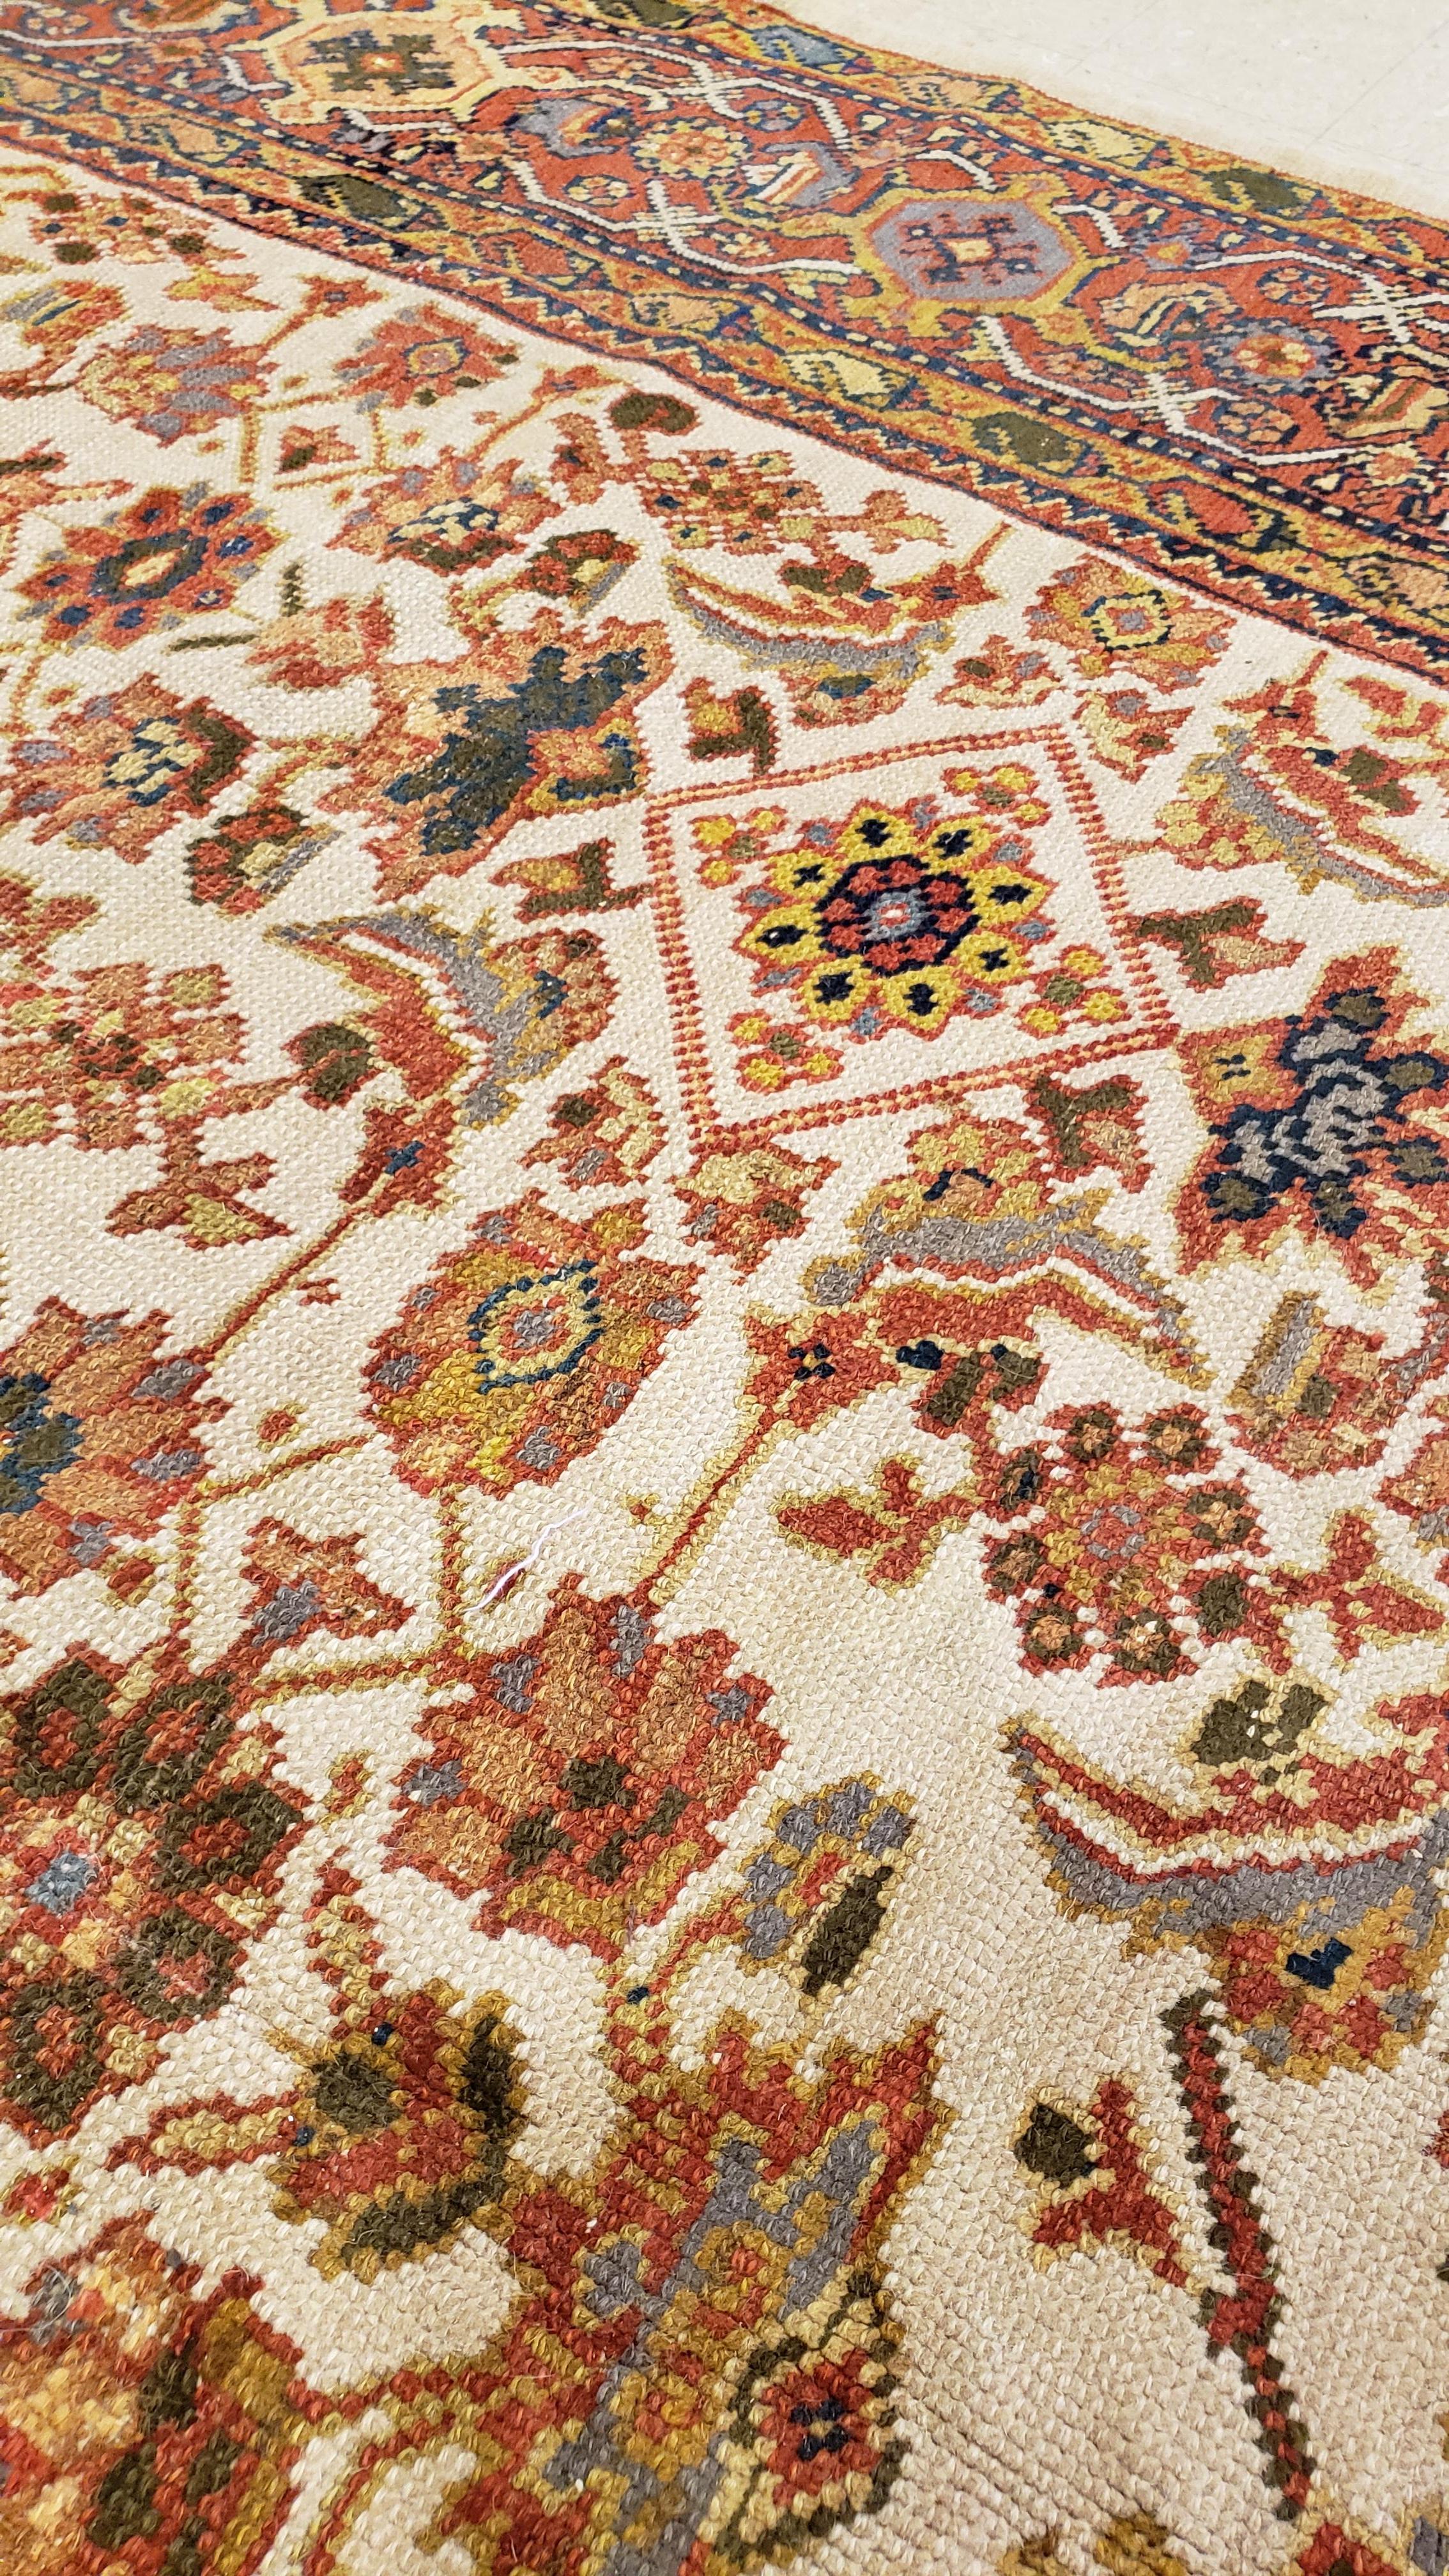 Antique Persian Sultanabad, Wool Handmade Beige, Gold, Navy and Red Oriental Rug In Excellent Condition For Sale In Port Washington, NY